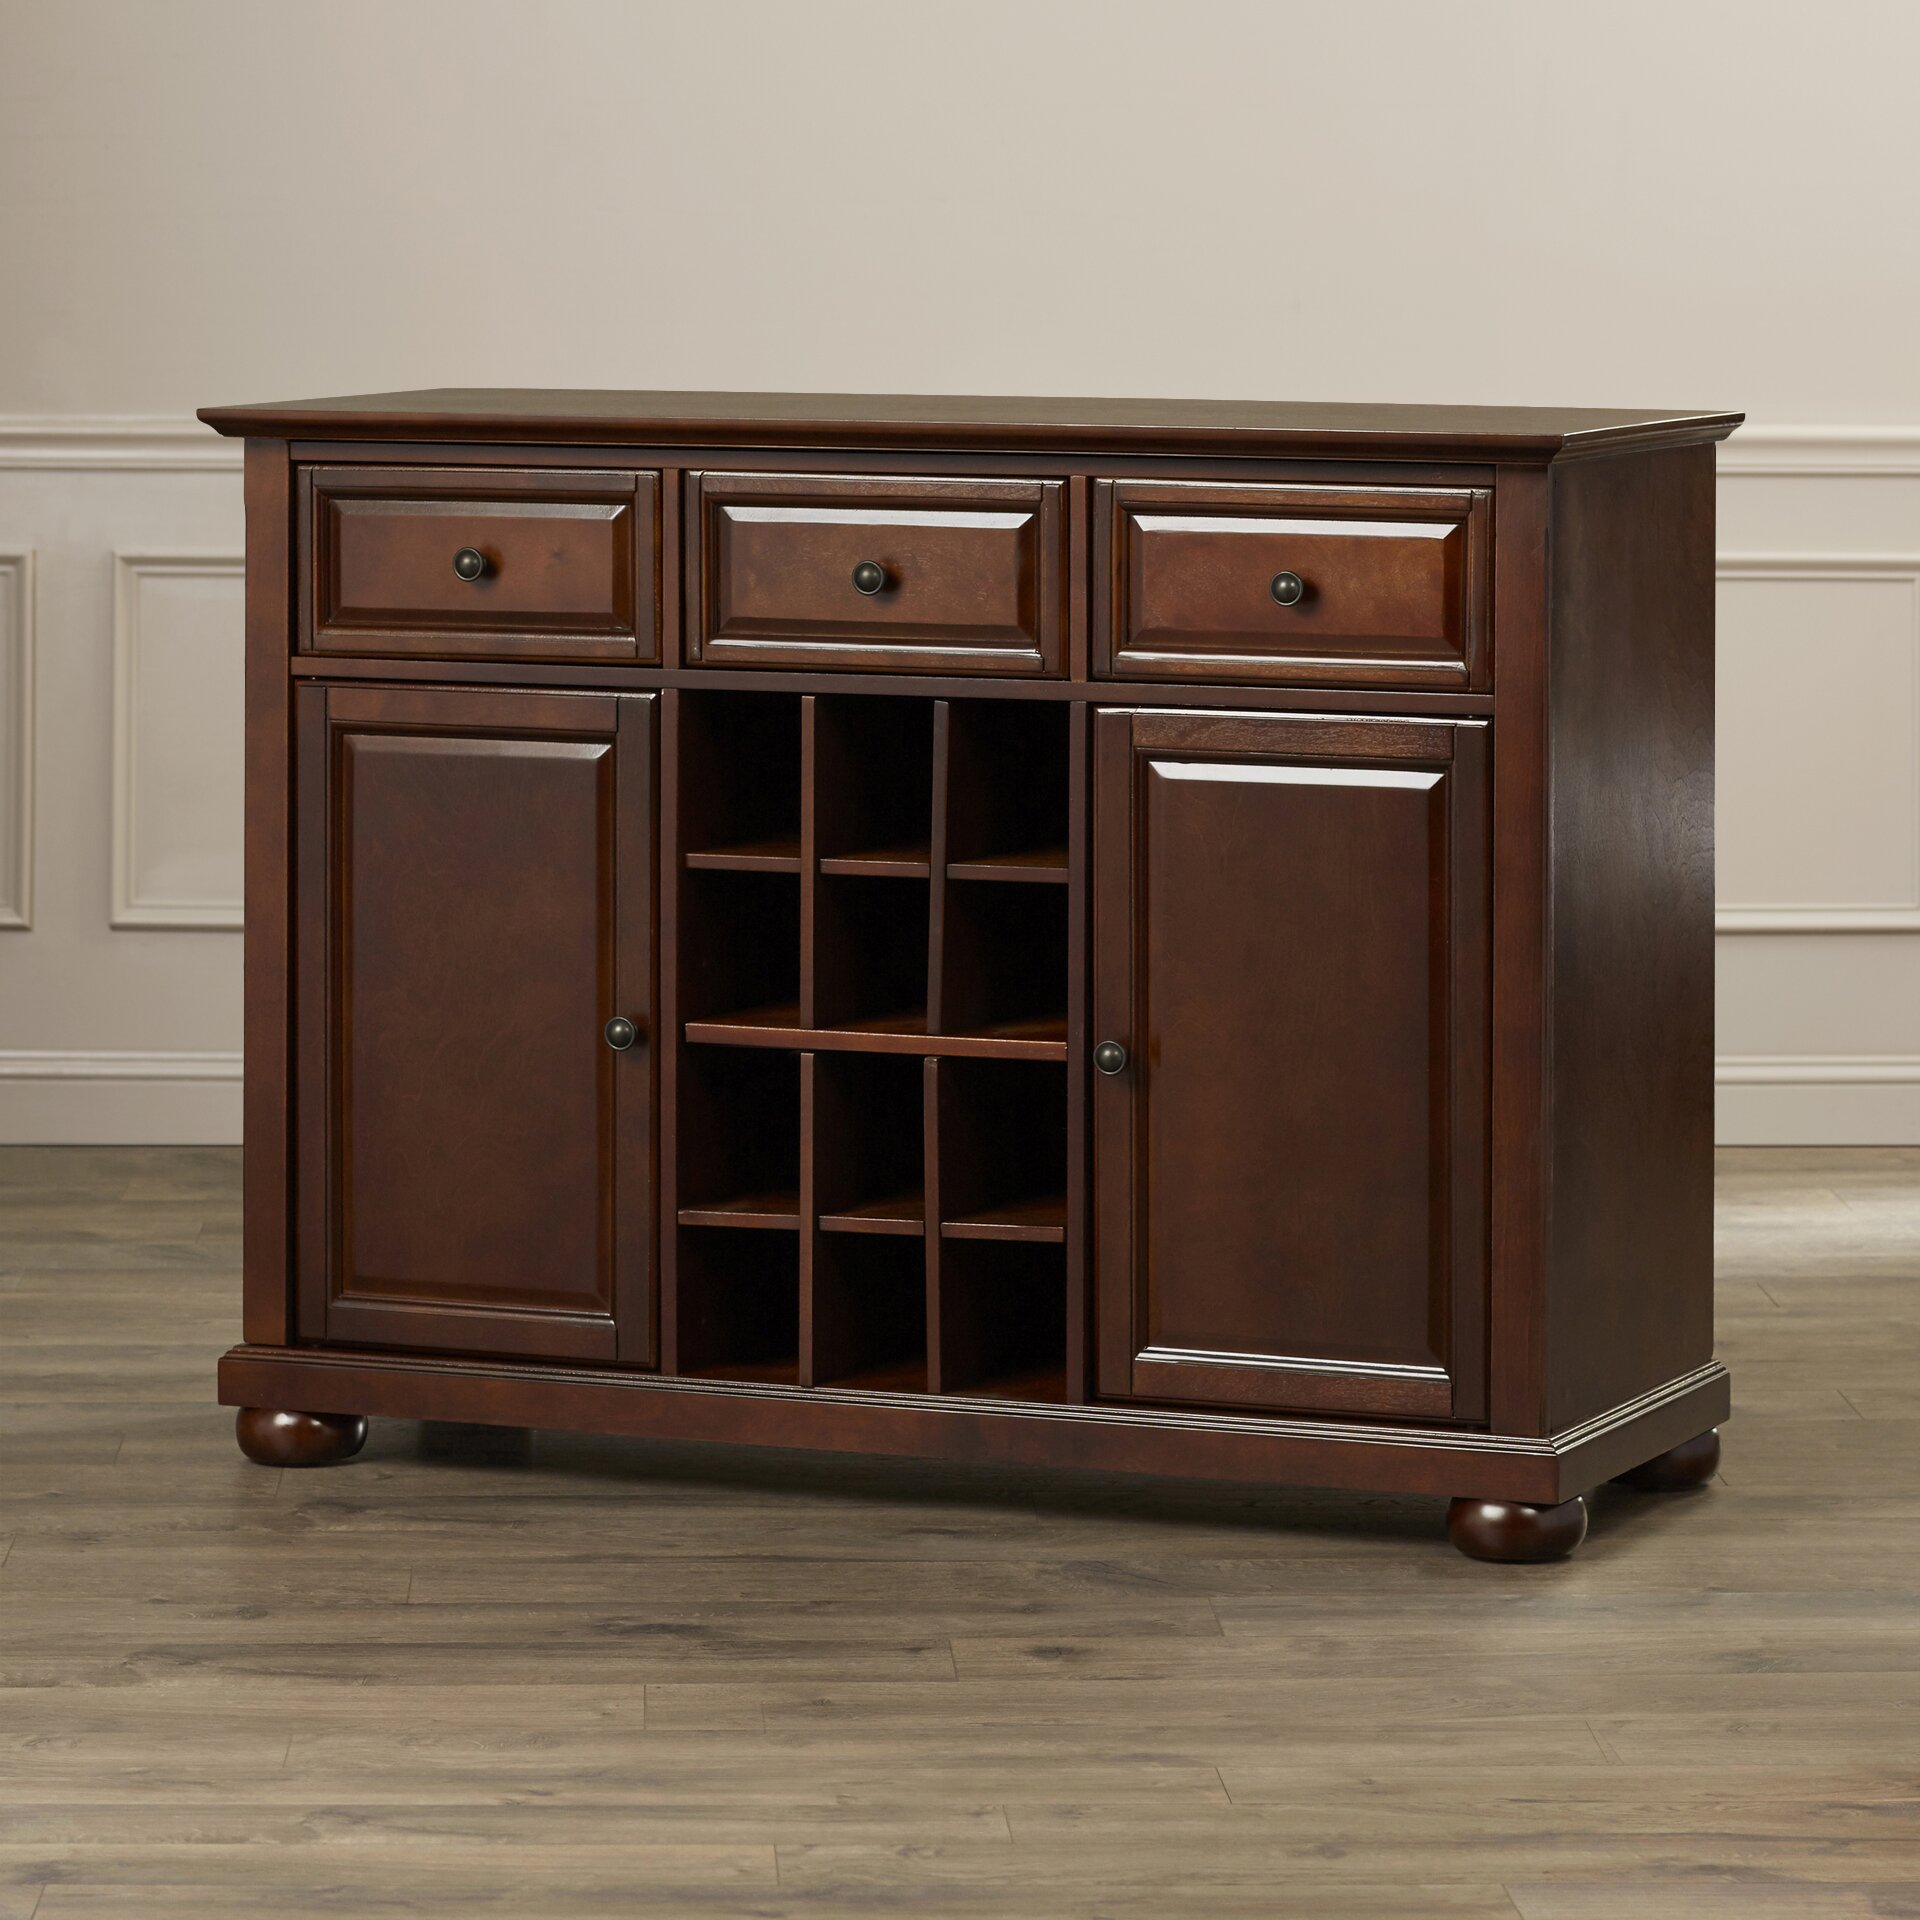 Darby Home Co Pottstown Buffet Server / Sideboard Cabinet with Wine ...